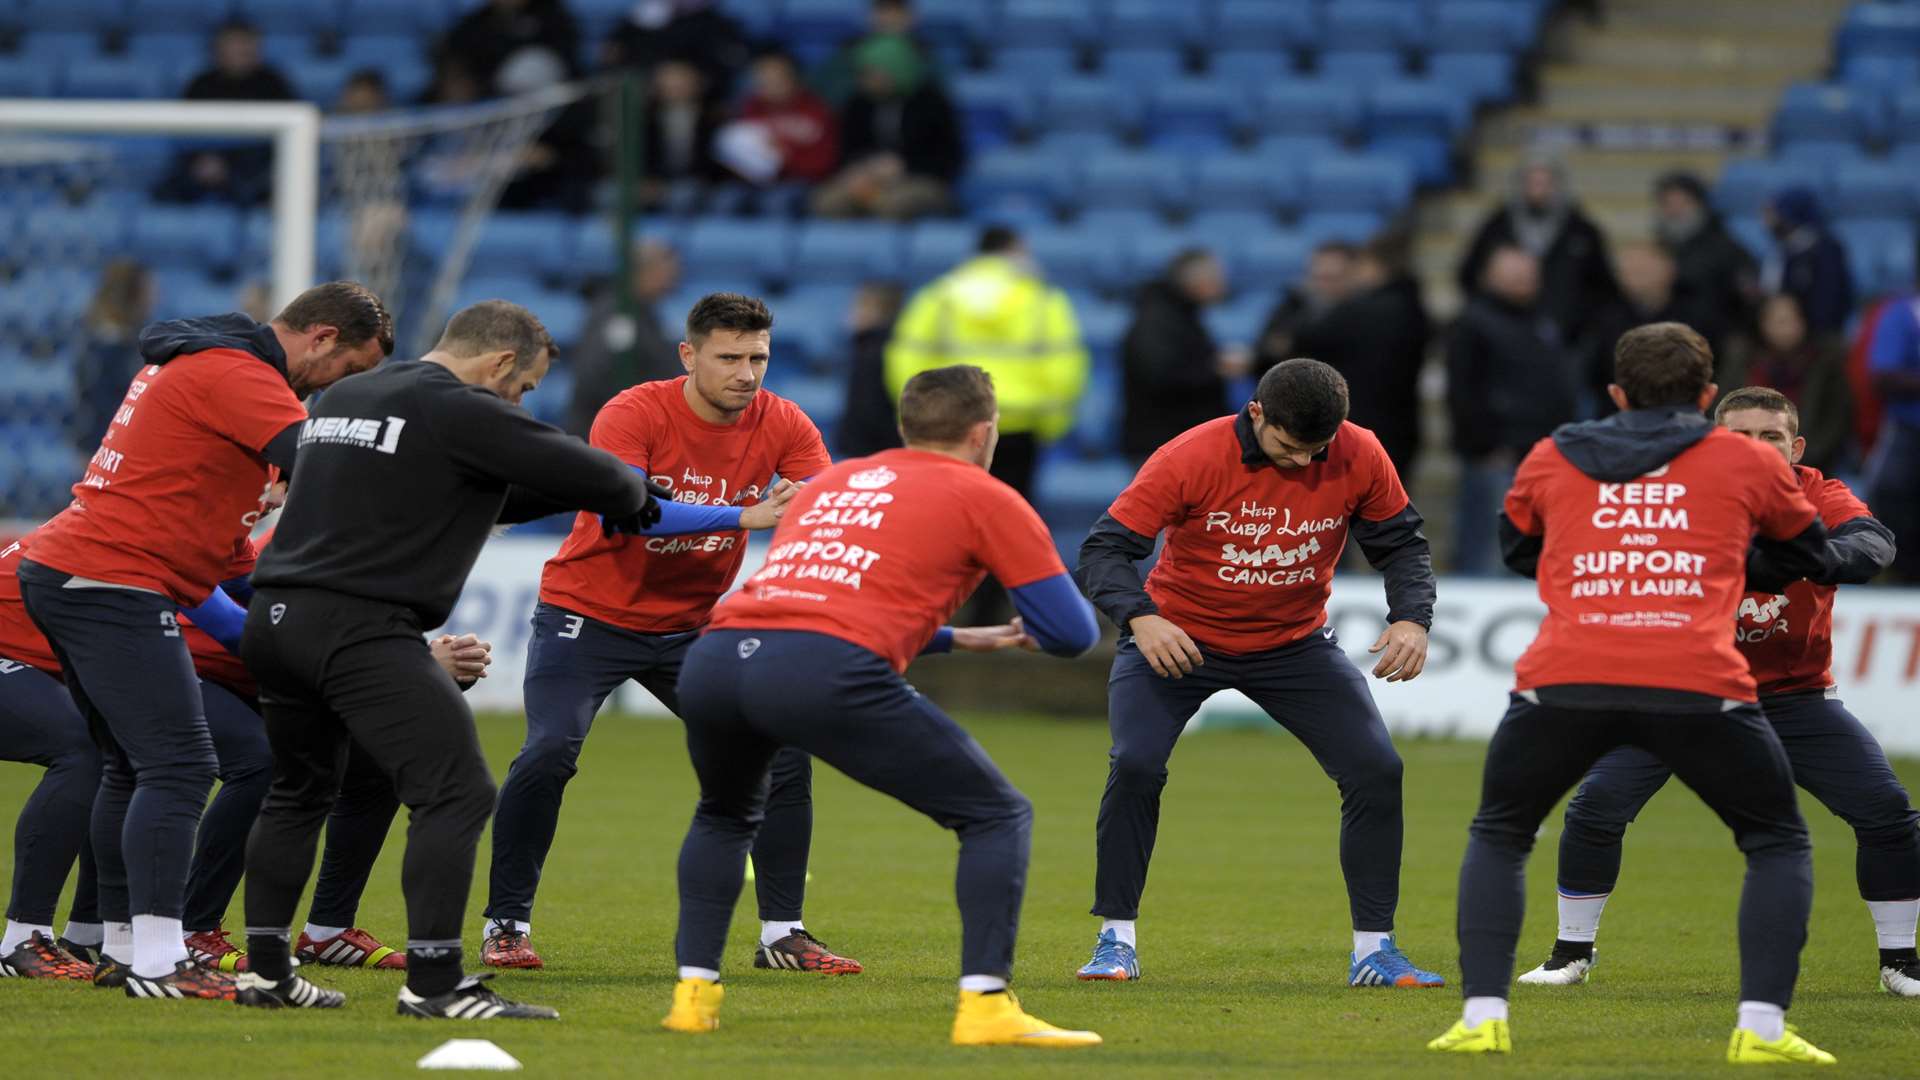 Gills players warming up in their Ruby t-shirts